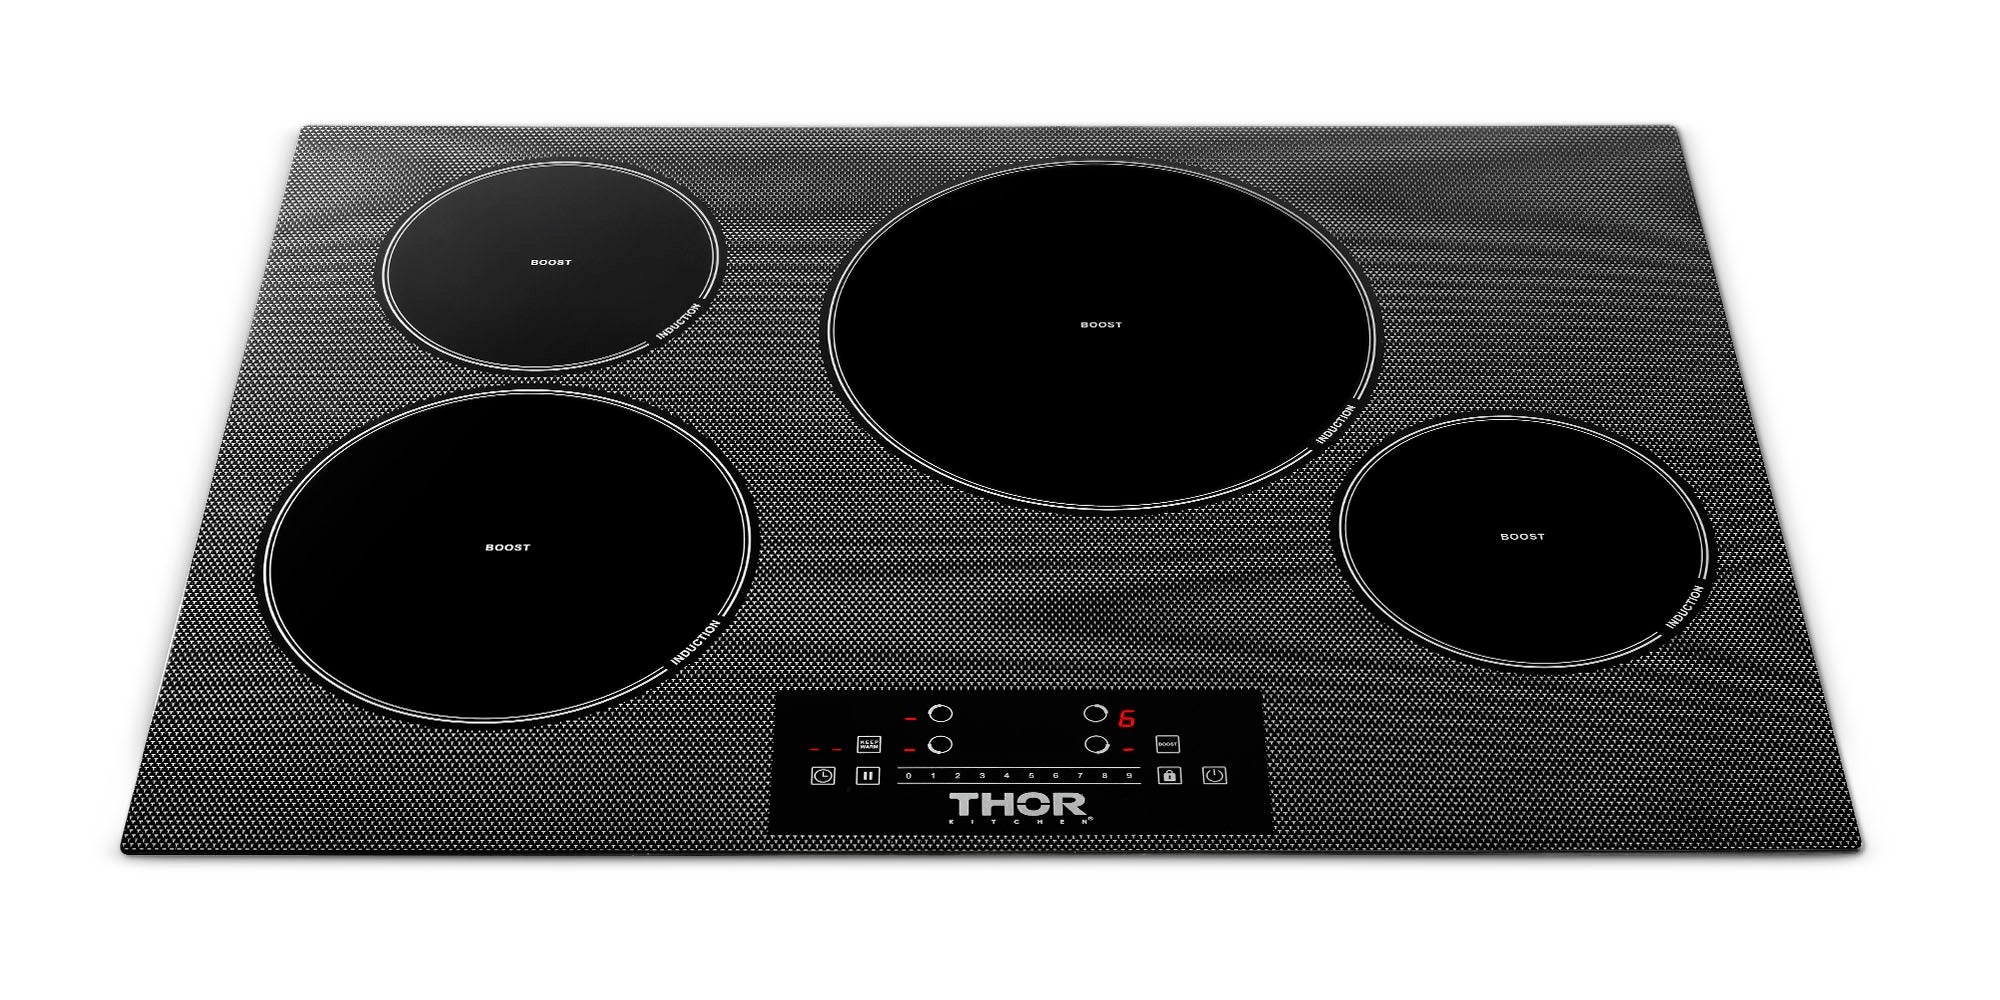 Thor Kitchen 30 Inch Built-In Induction Cooktop with 4 Elements -Model TIH30